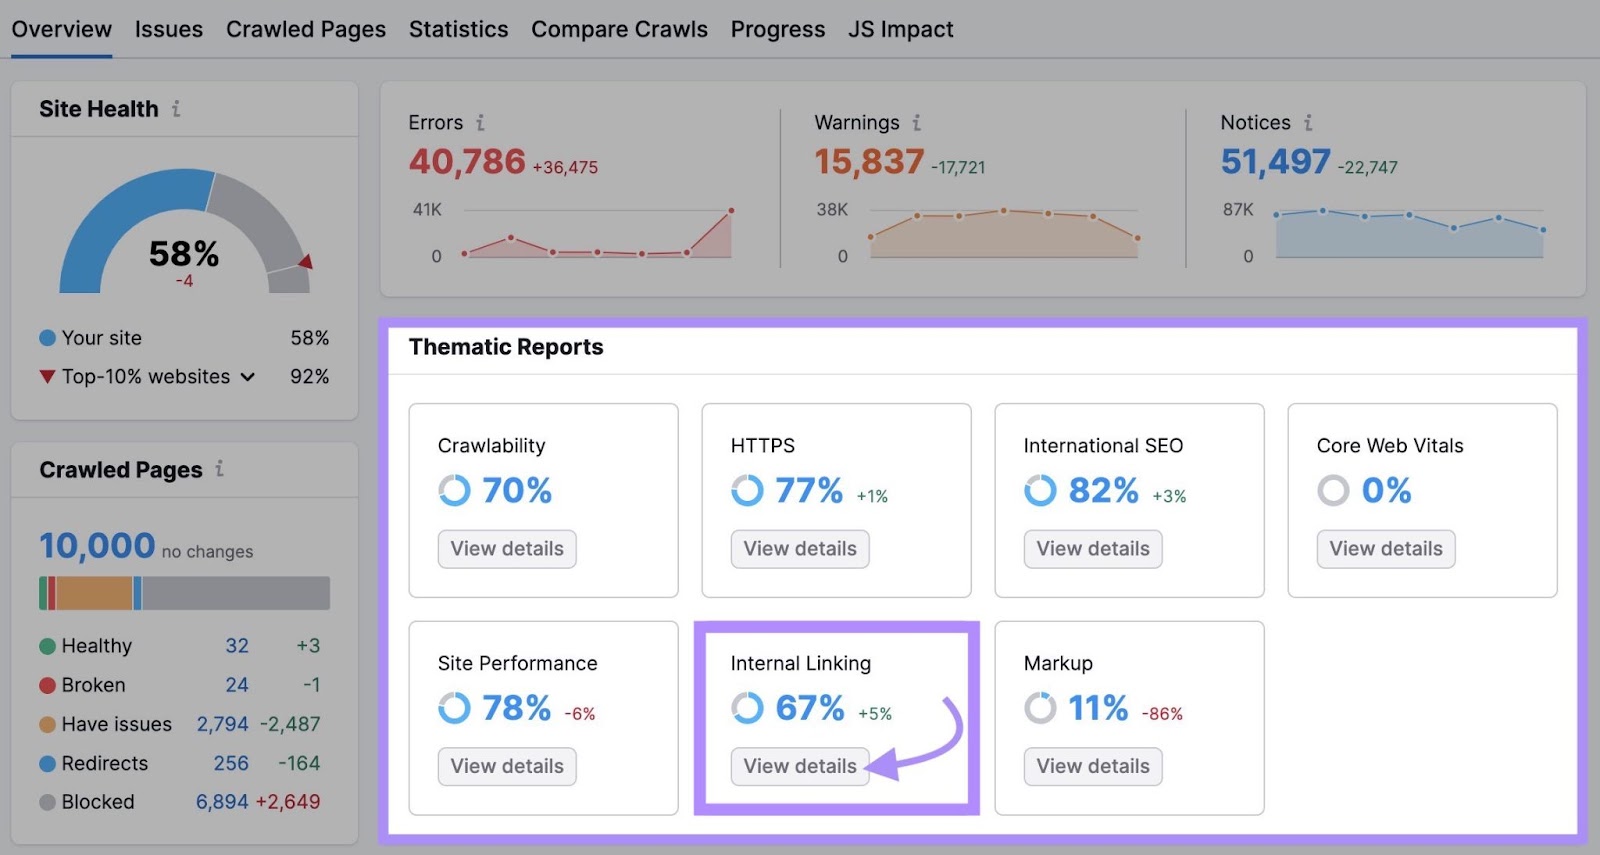 "Internal Linking" module highlighted nether  "Thematic Reports" conception  successful  Site Audit